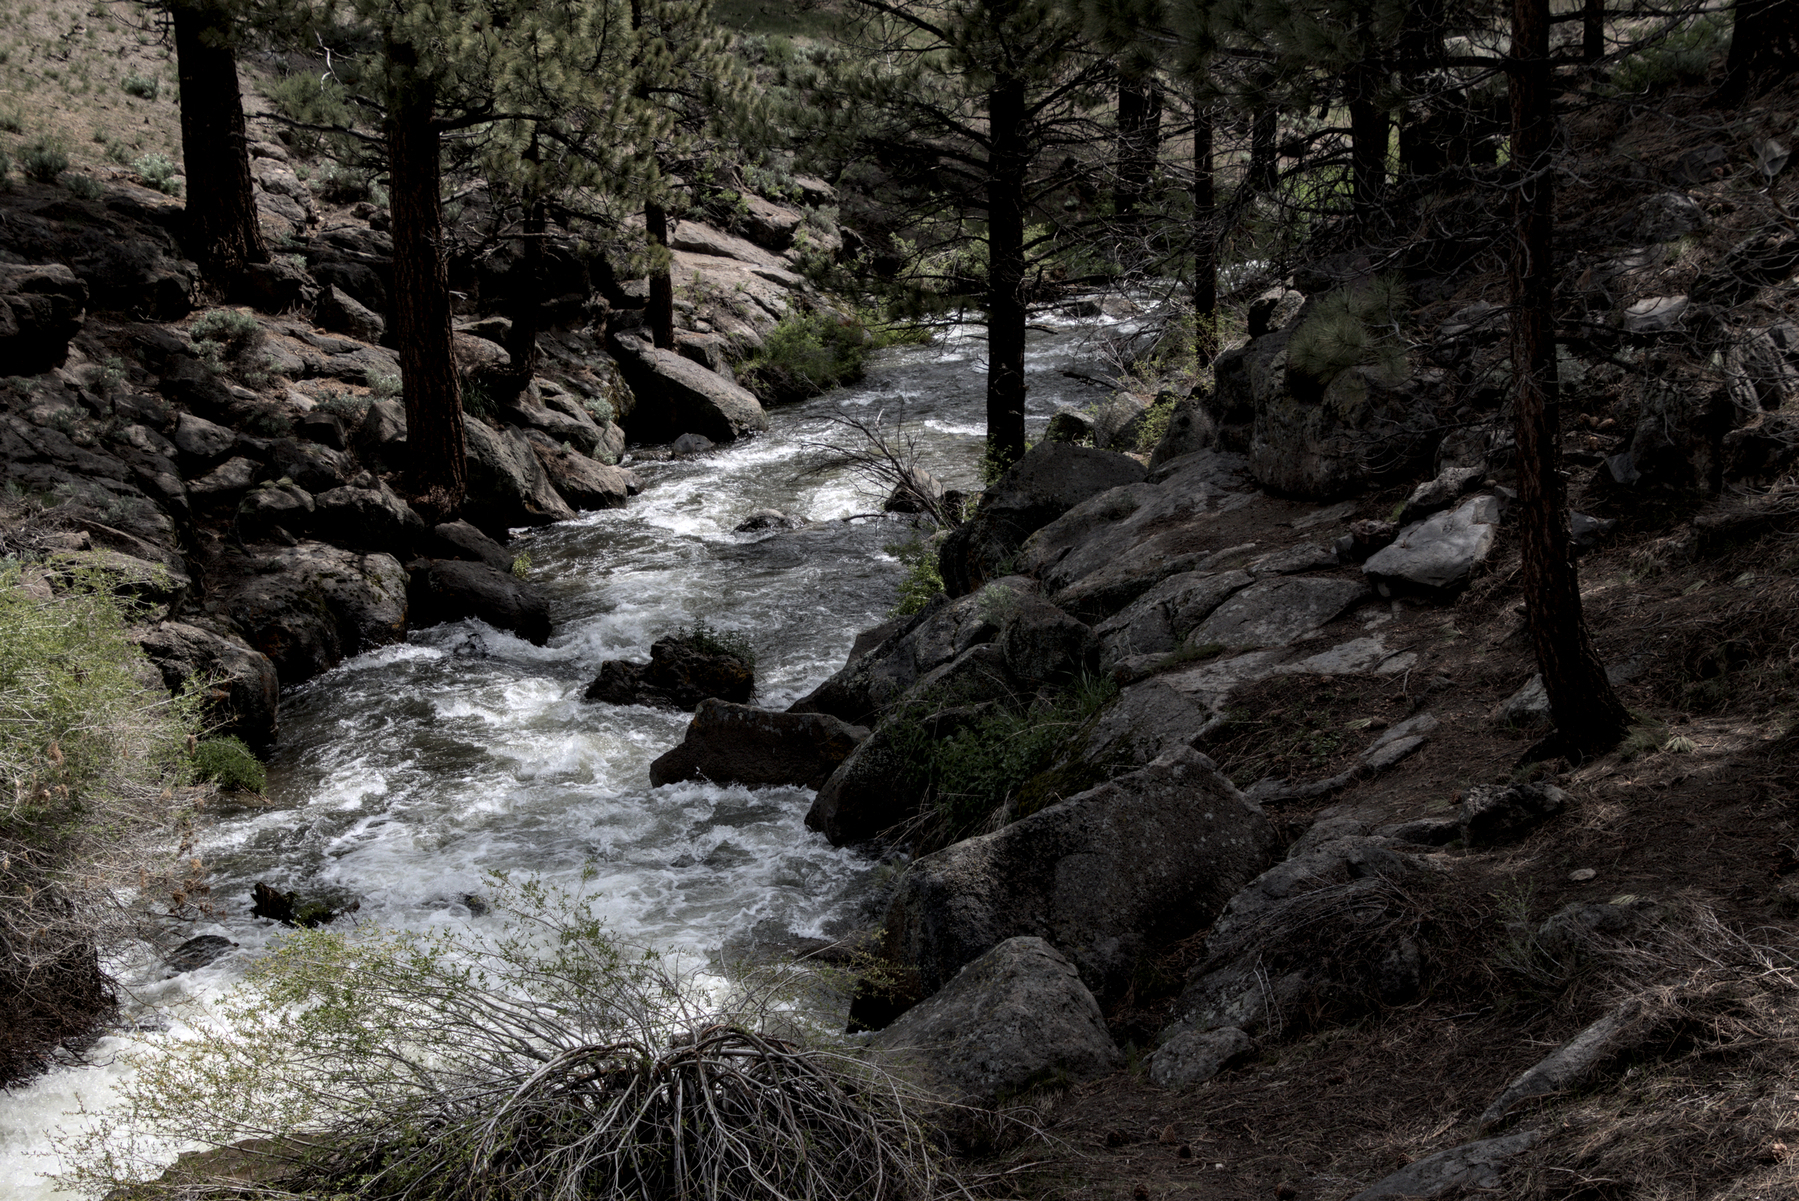 A creek in the woods is flowing high and fast through a rocky channel in pine forest.